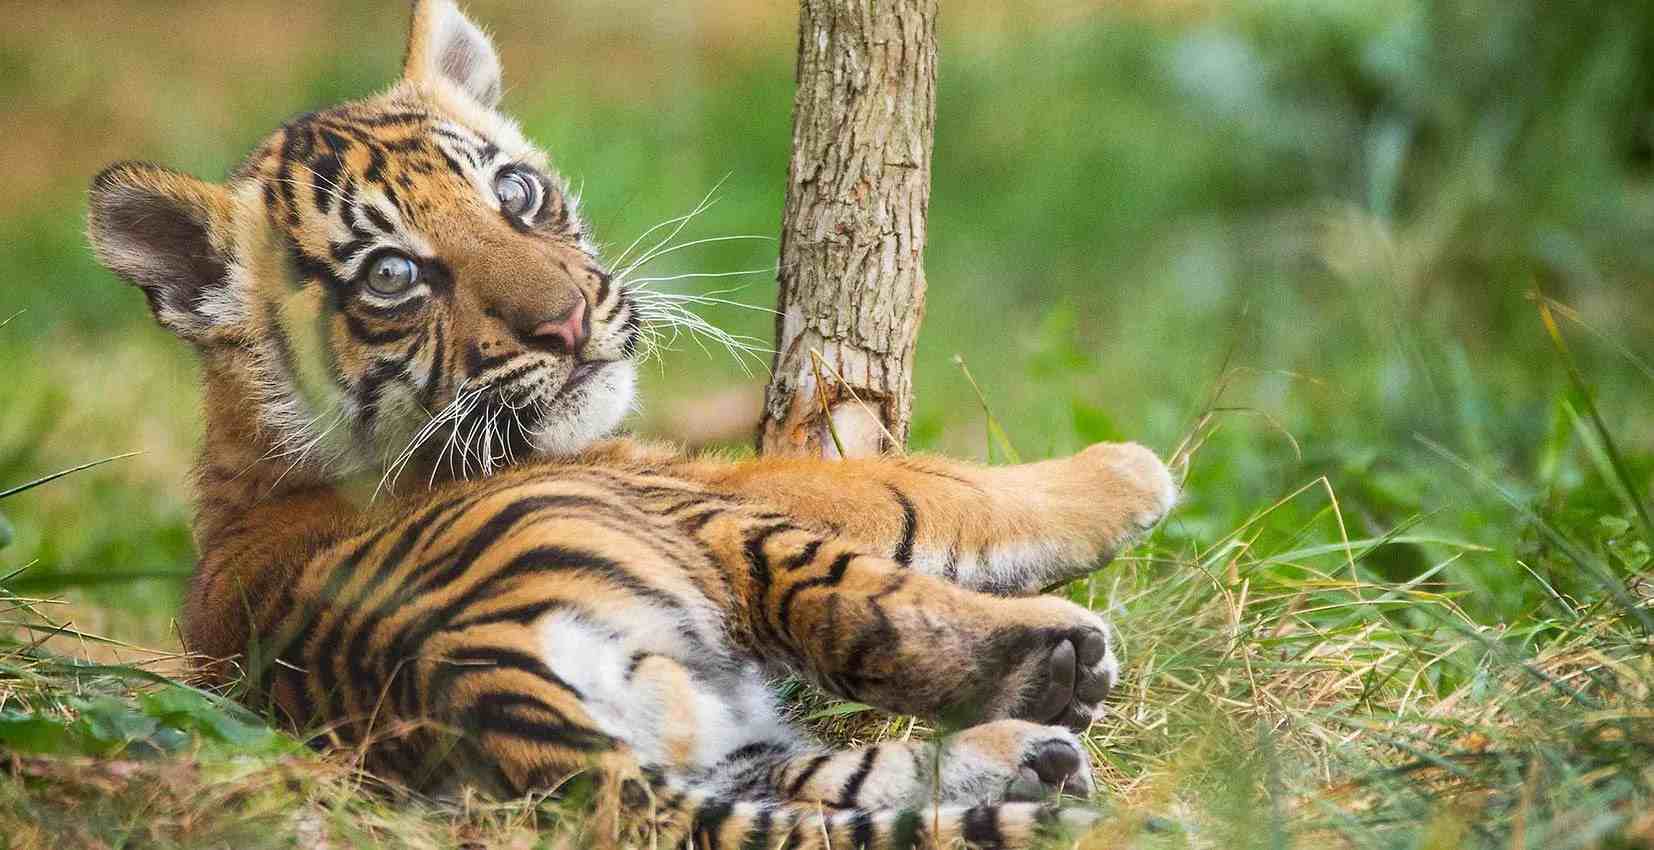 Tiger relaxing at ZSL London Zoo